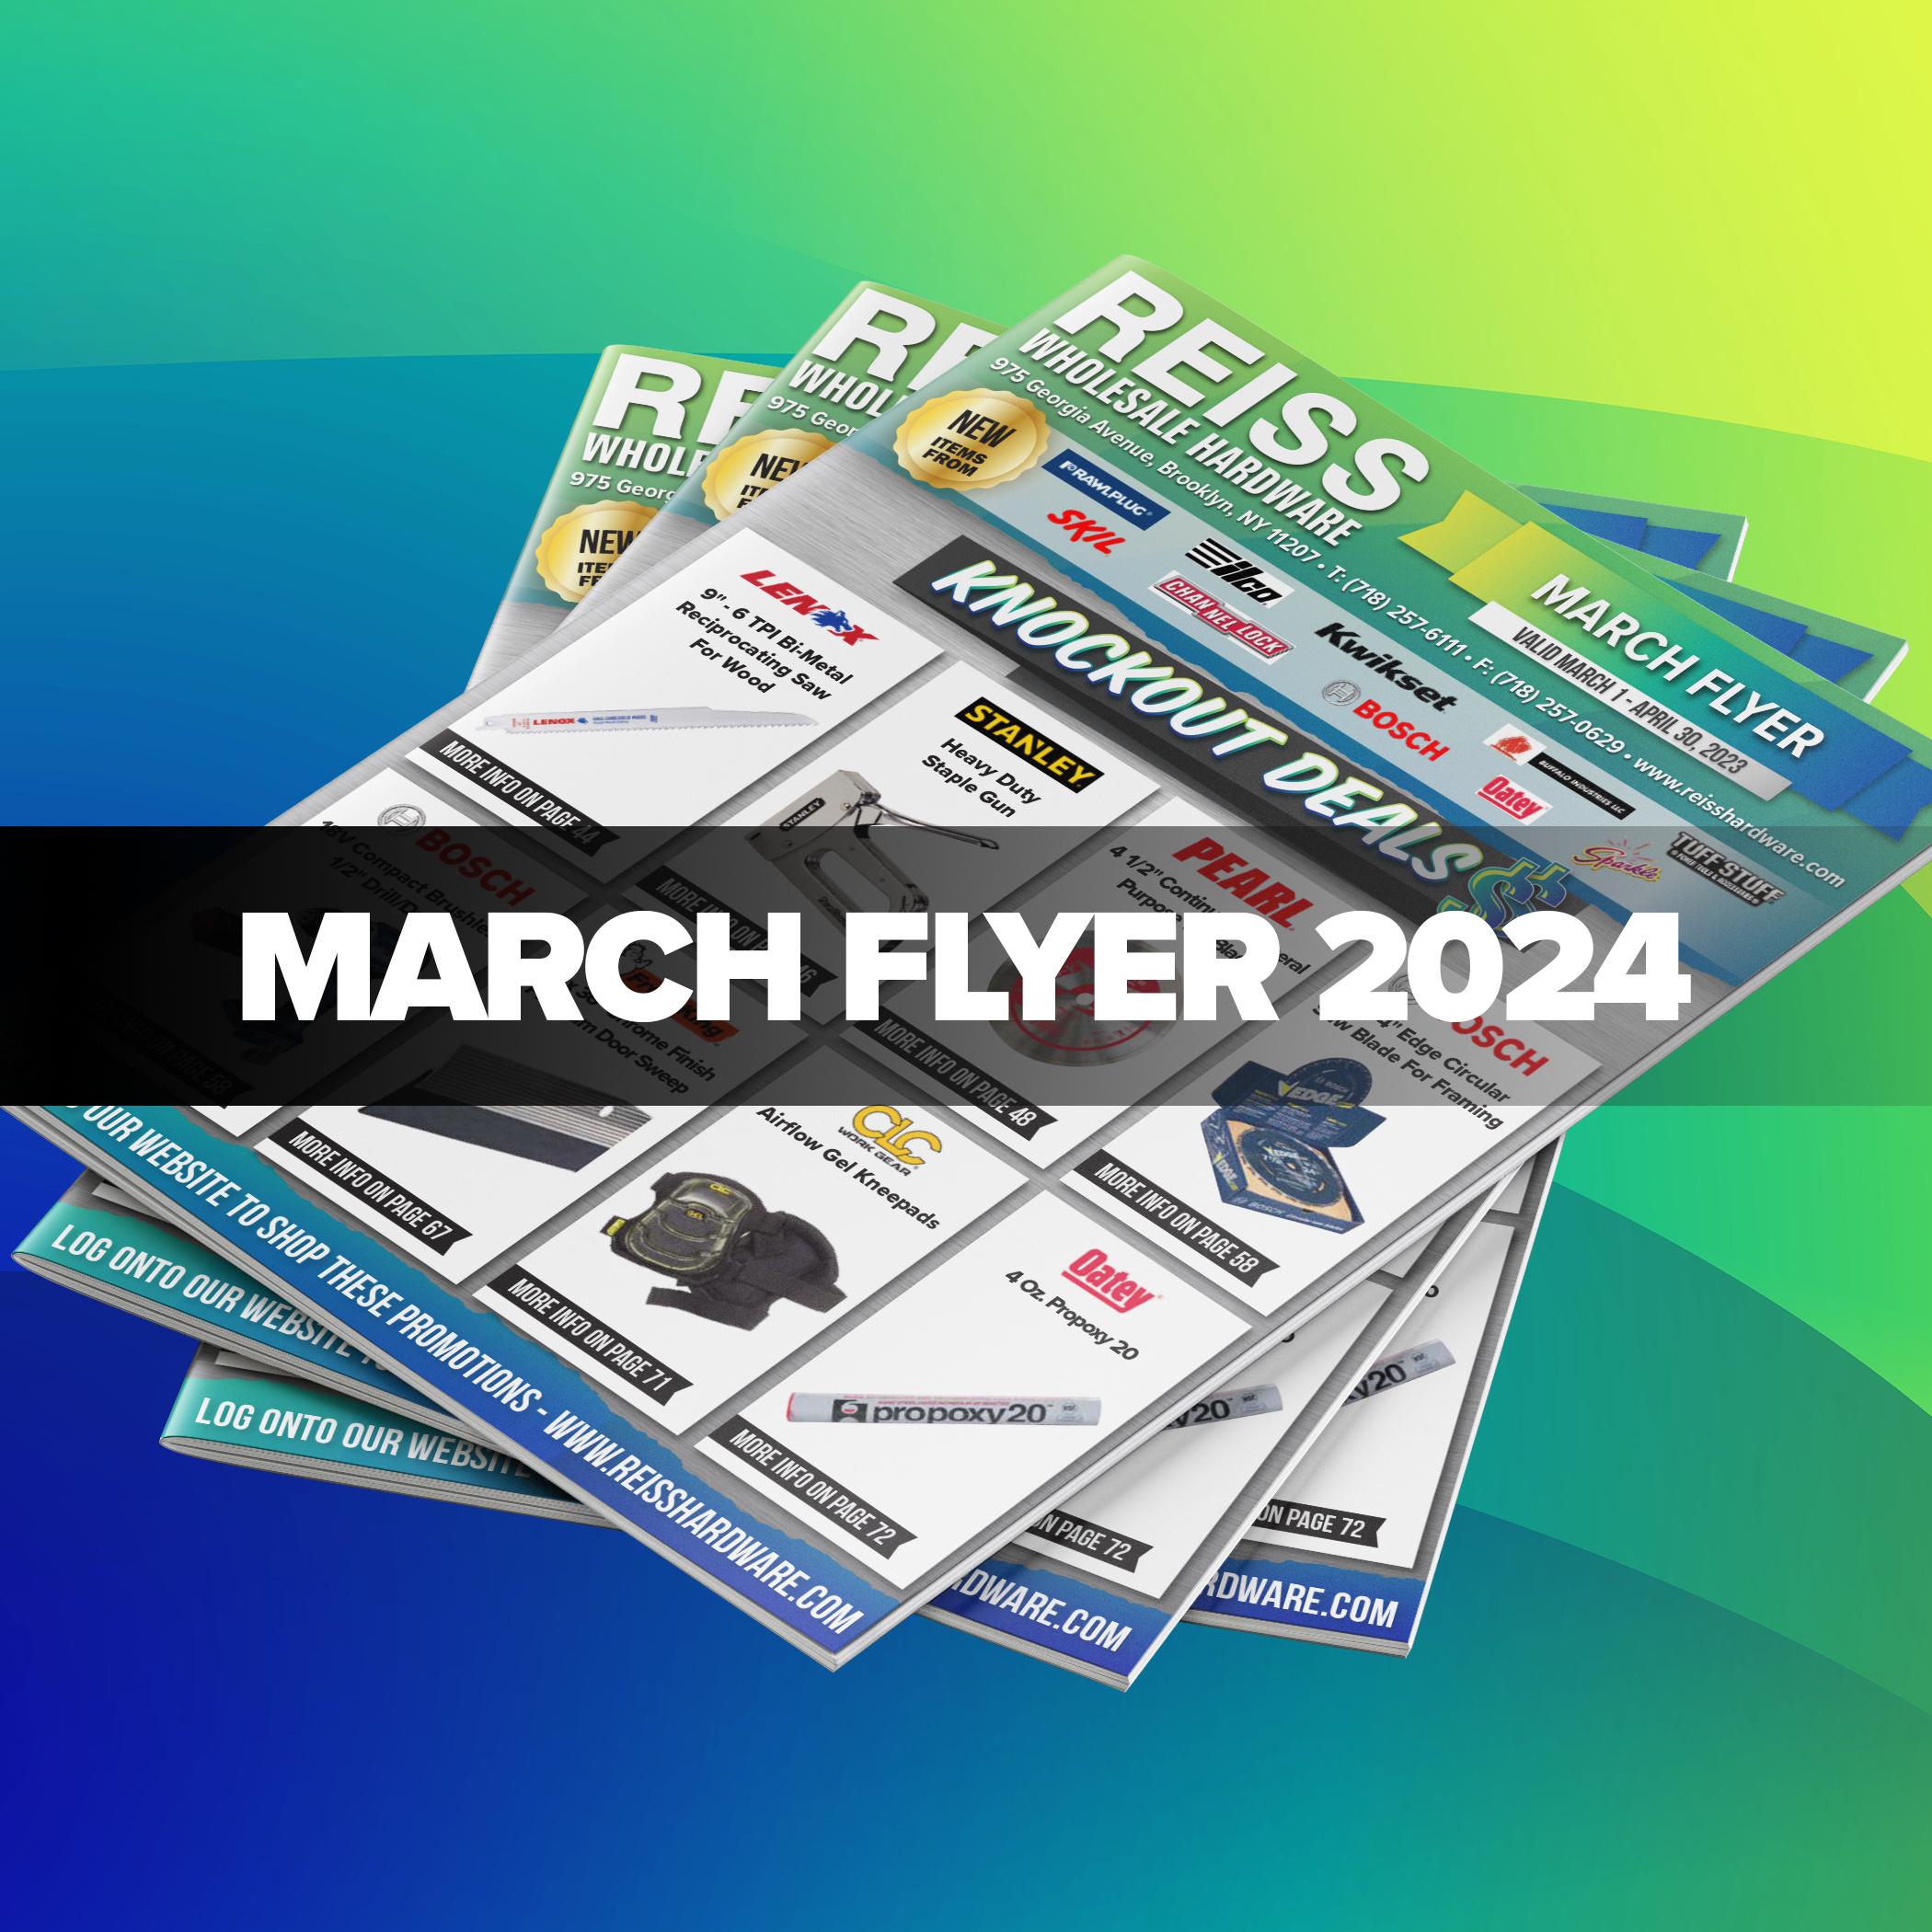 March Flyer 2024